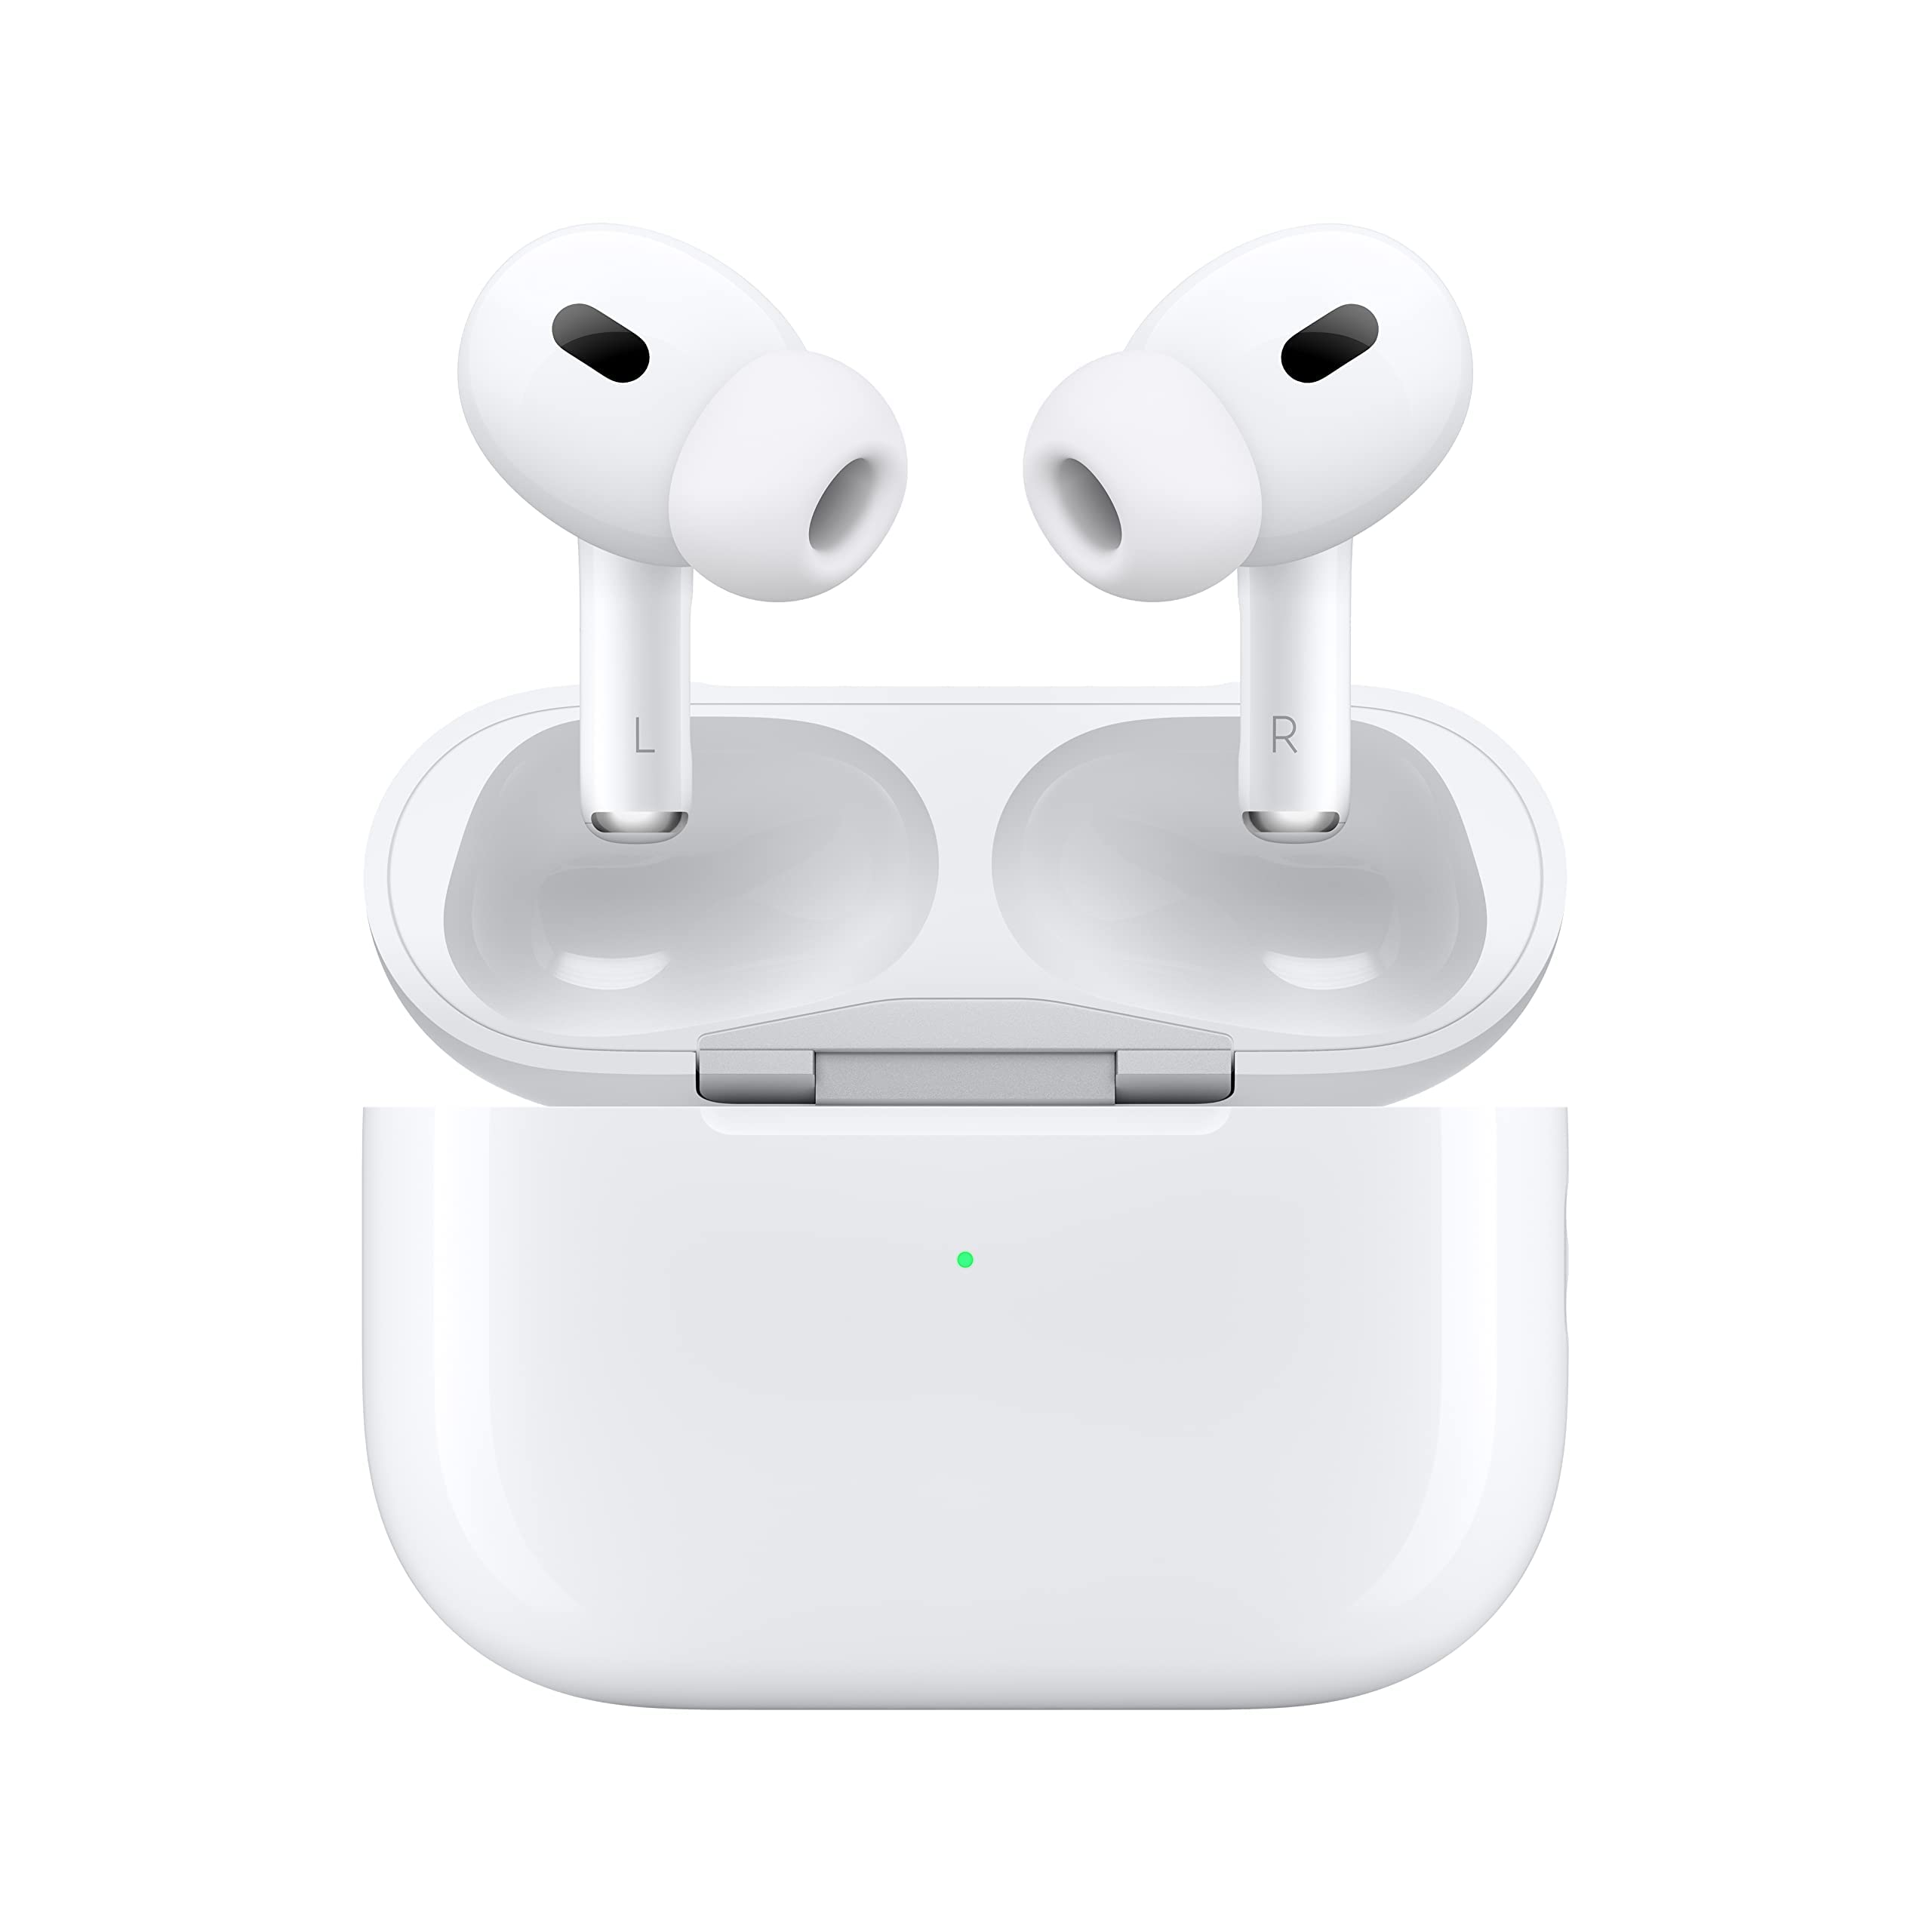 airpods-pro-controls-how-to-use-noise-cancellation-transparency-mode